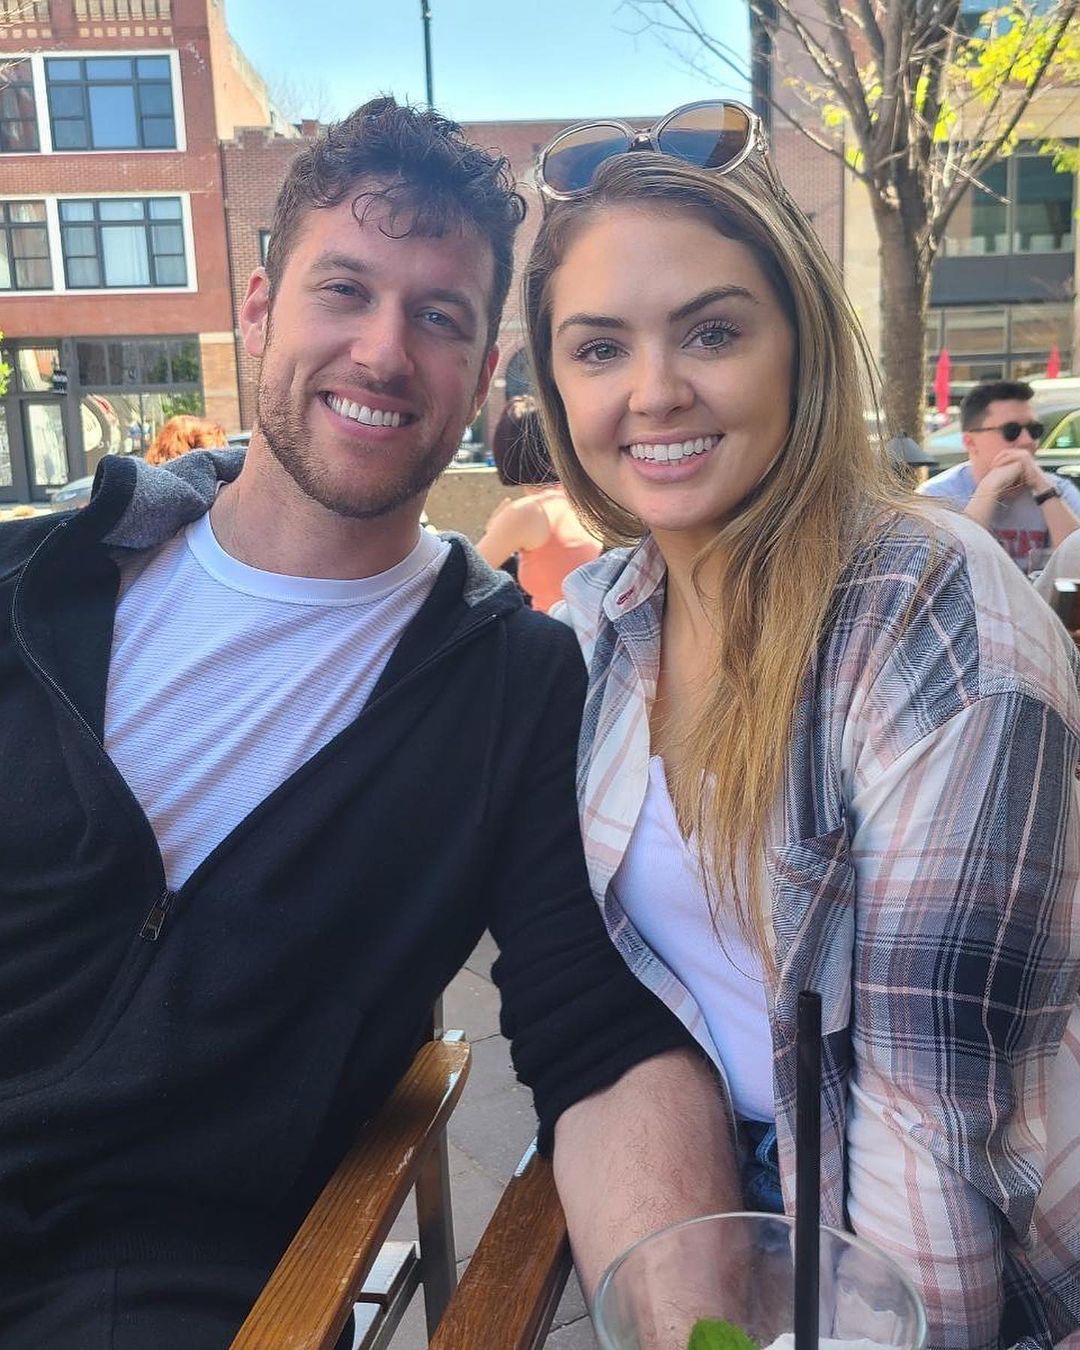 Are Clayton, Susie Still Together? Bachelor Couple picture